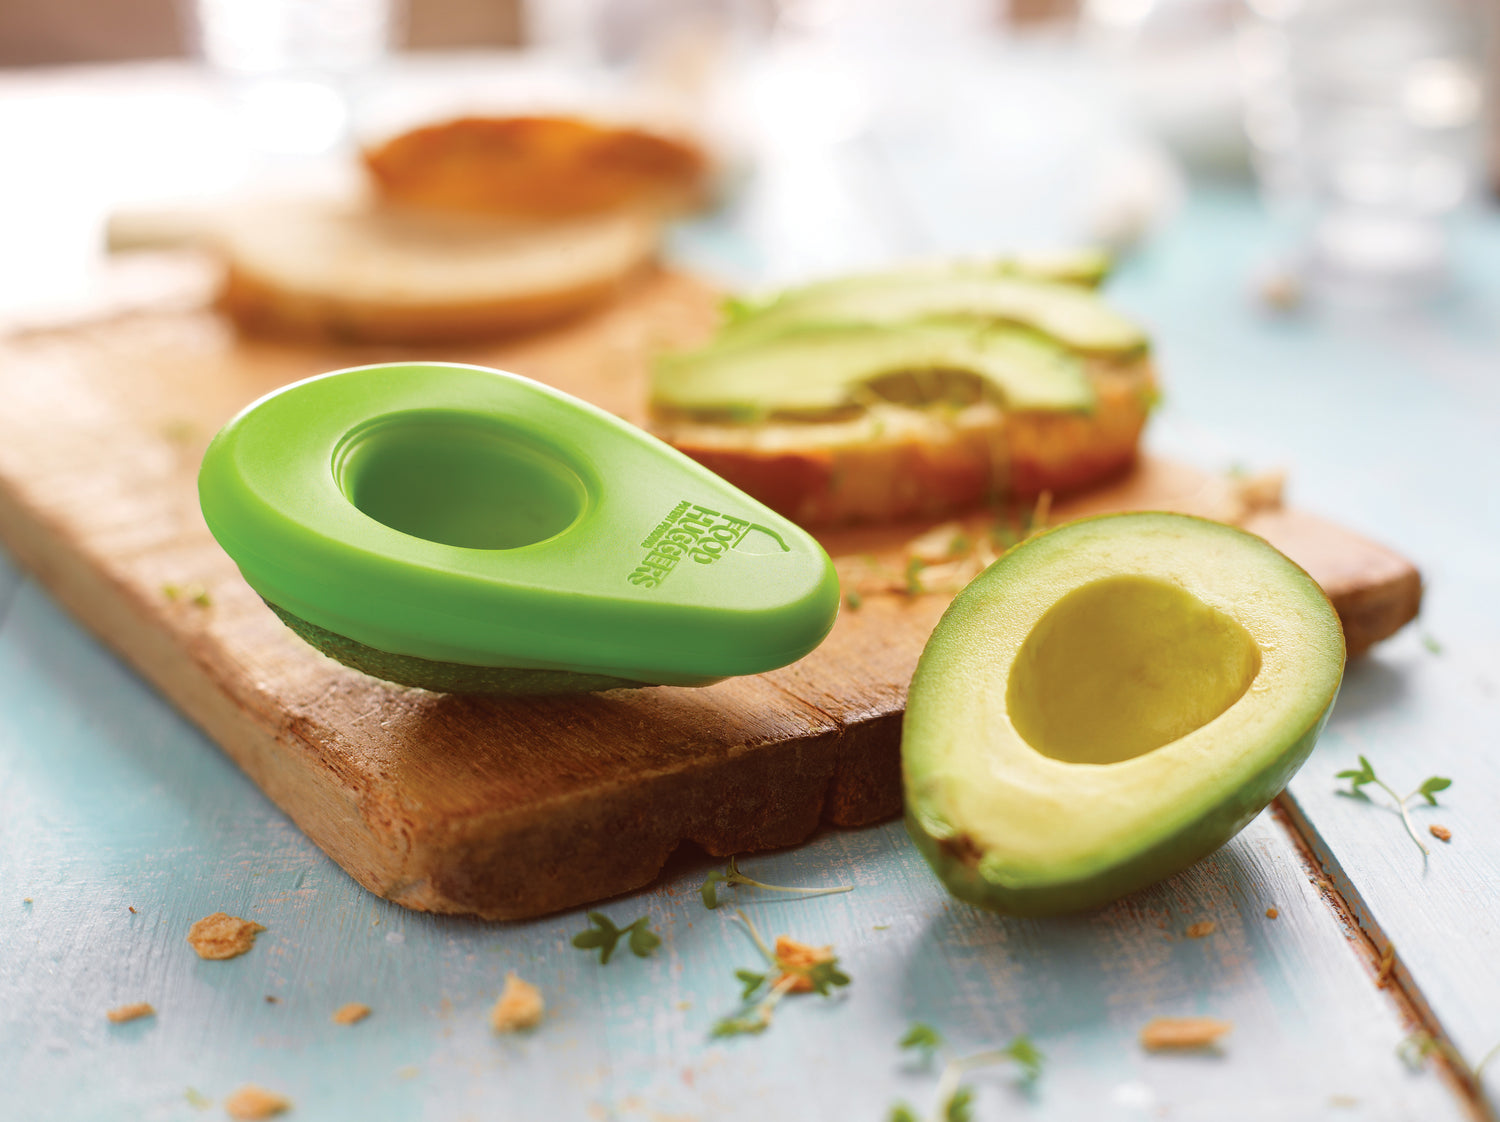 Half an avocado on a table, the other half on a wooden board protected by a green silicone wrap with the Food Huggers logo for zero waste.